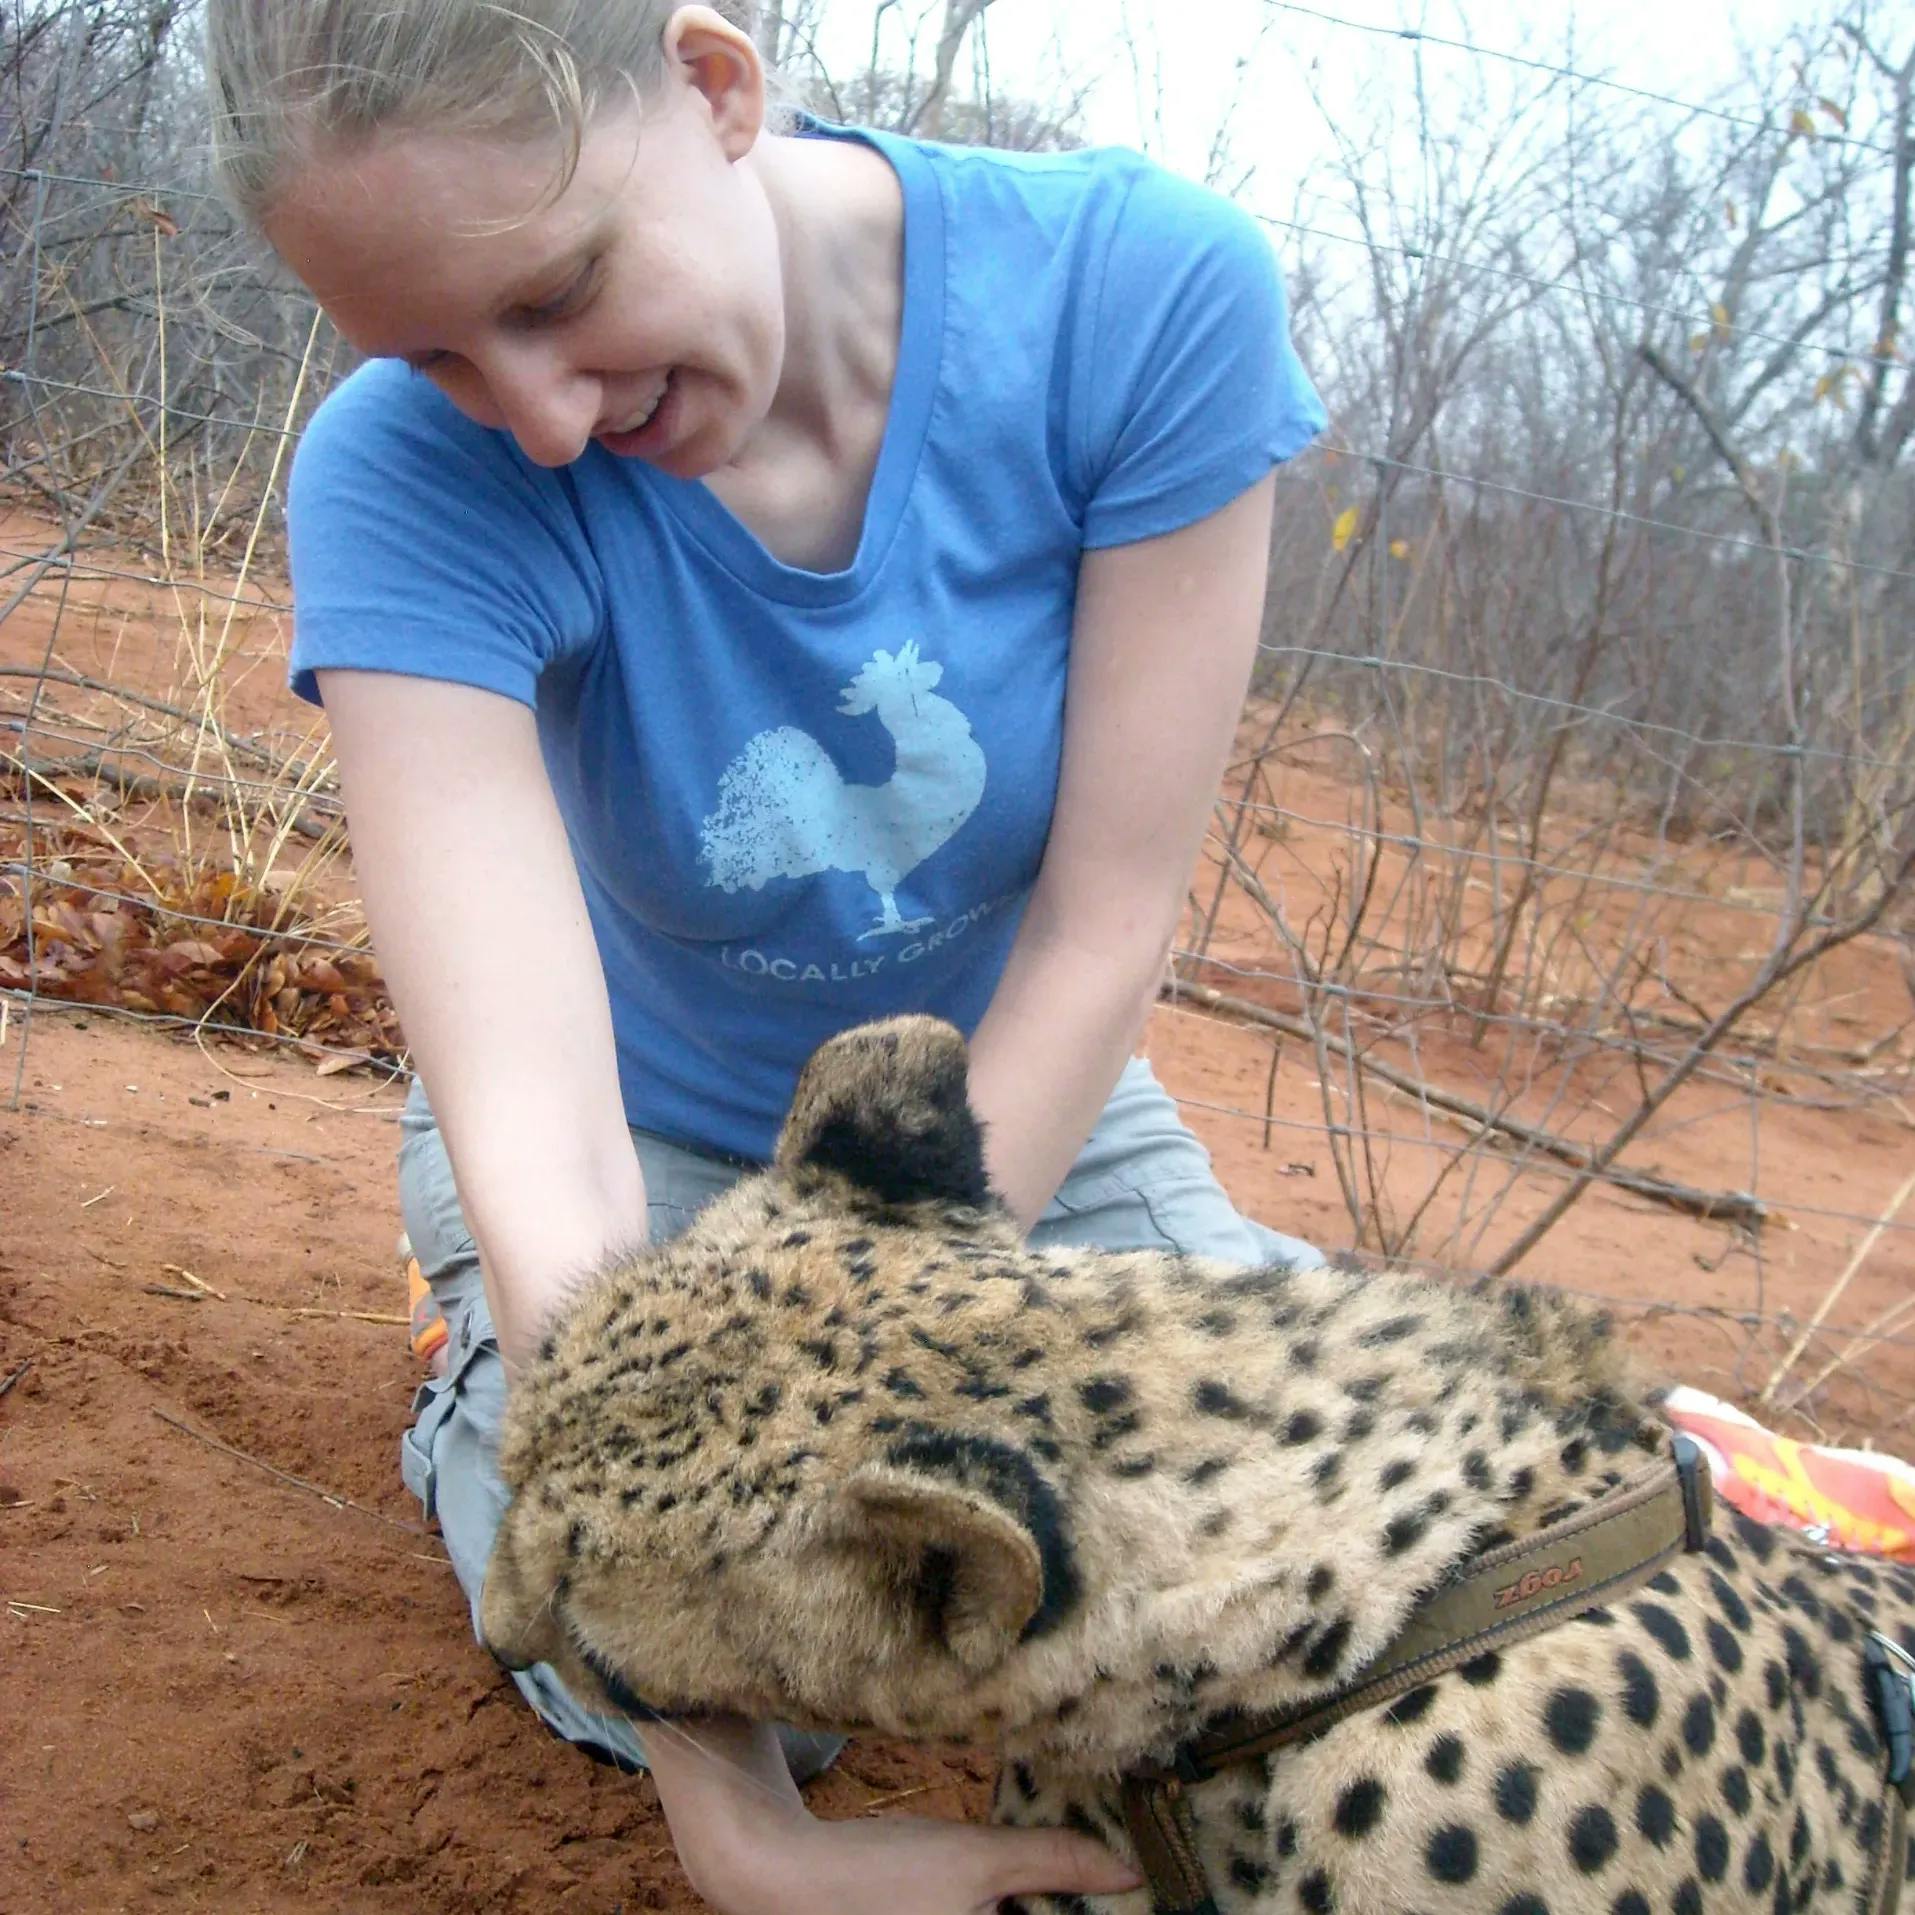 On my first trip to Zambia I visited an animal refuge and got to cuddle with some cheetahs. Such an amazing experience!